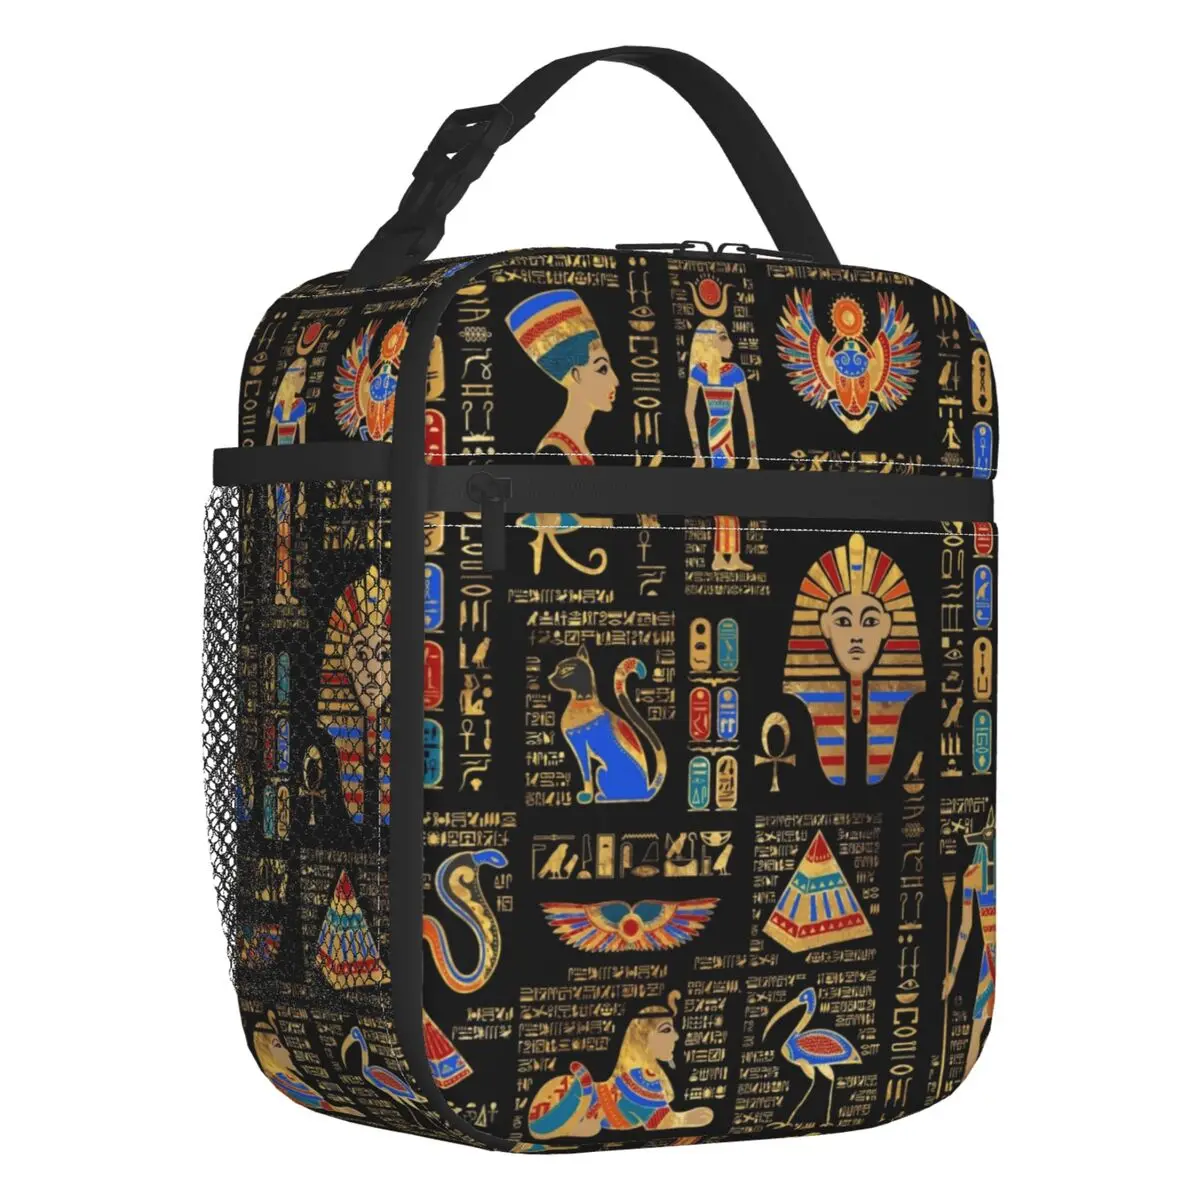 Egyptian Hieroglyphs And Deities Portable Lunch Box Multifunction Ancient Egypt Art Cooler Thermal Food Insulated Lunch Bag Kids